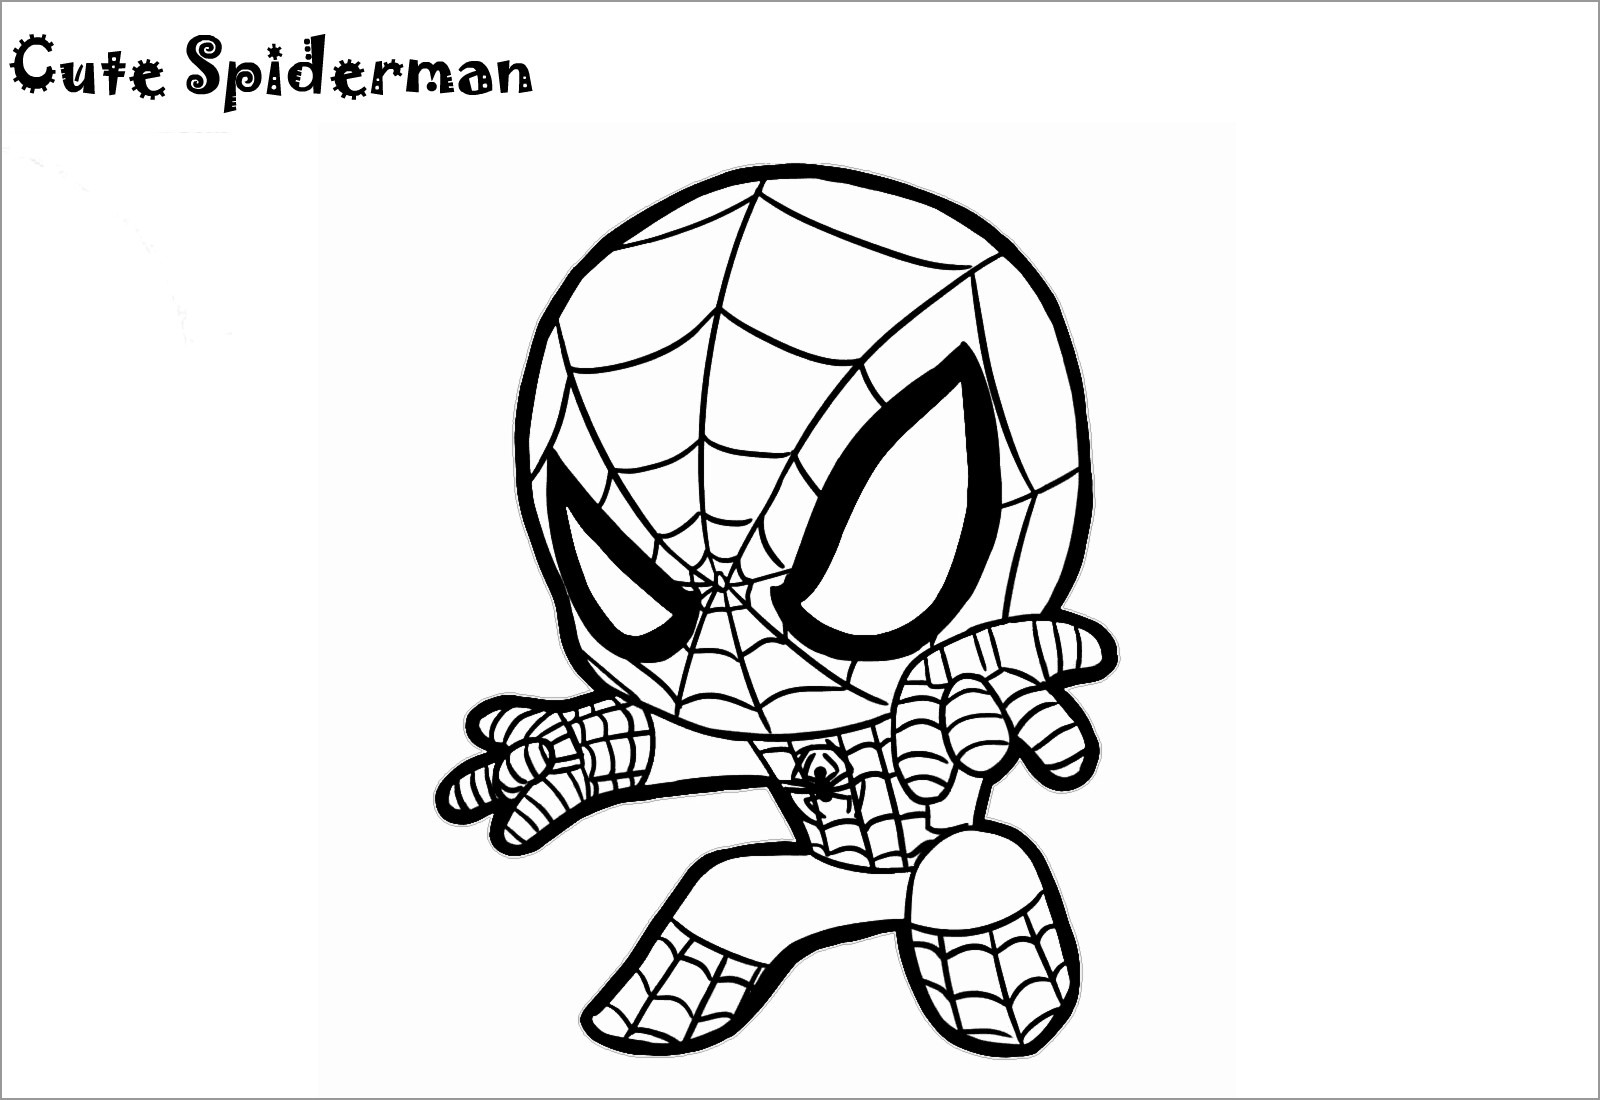 Chibi Spiderman Coloring Page to Print   ColoringBay